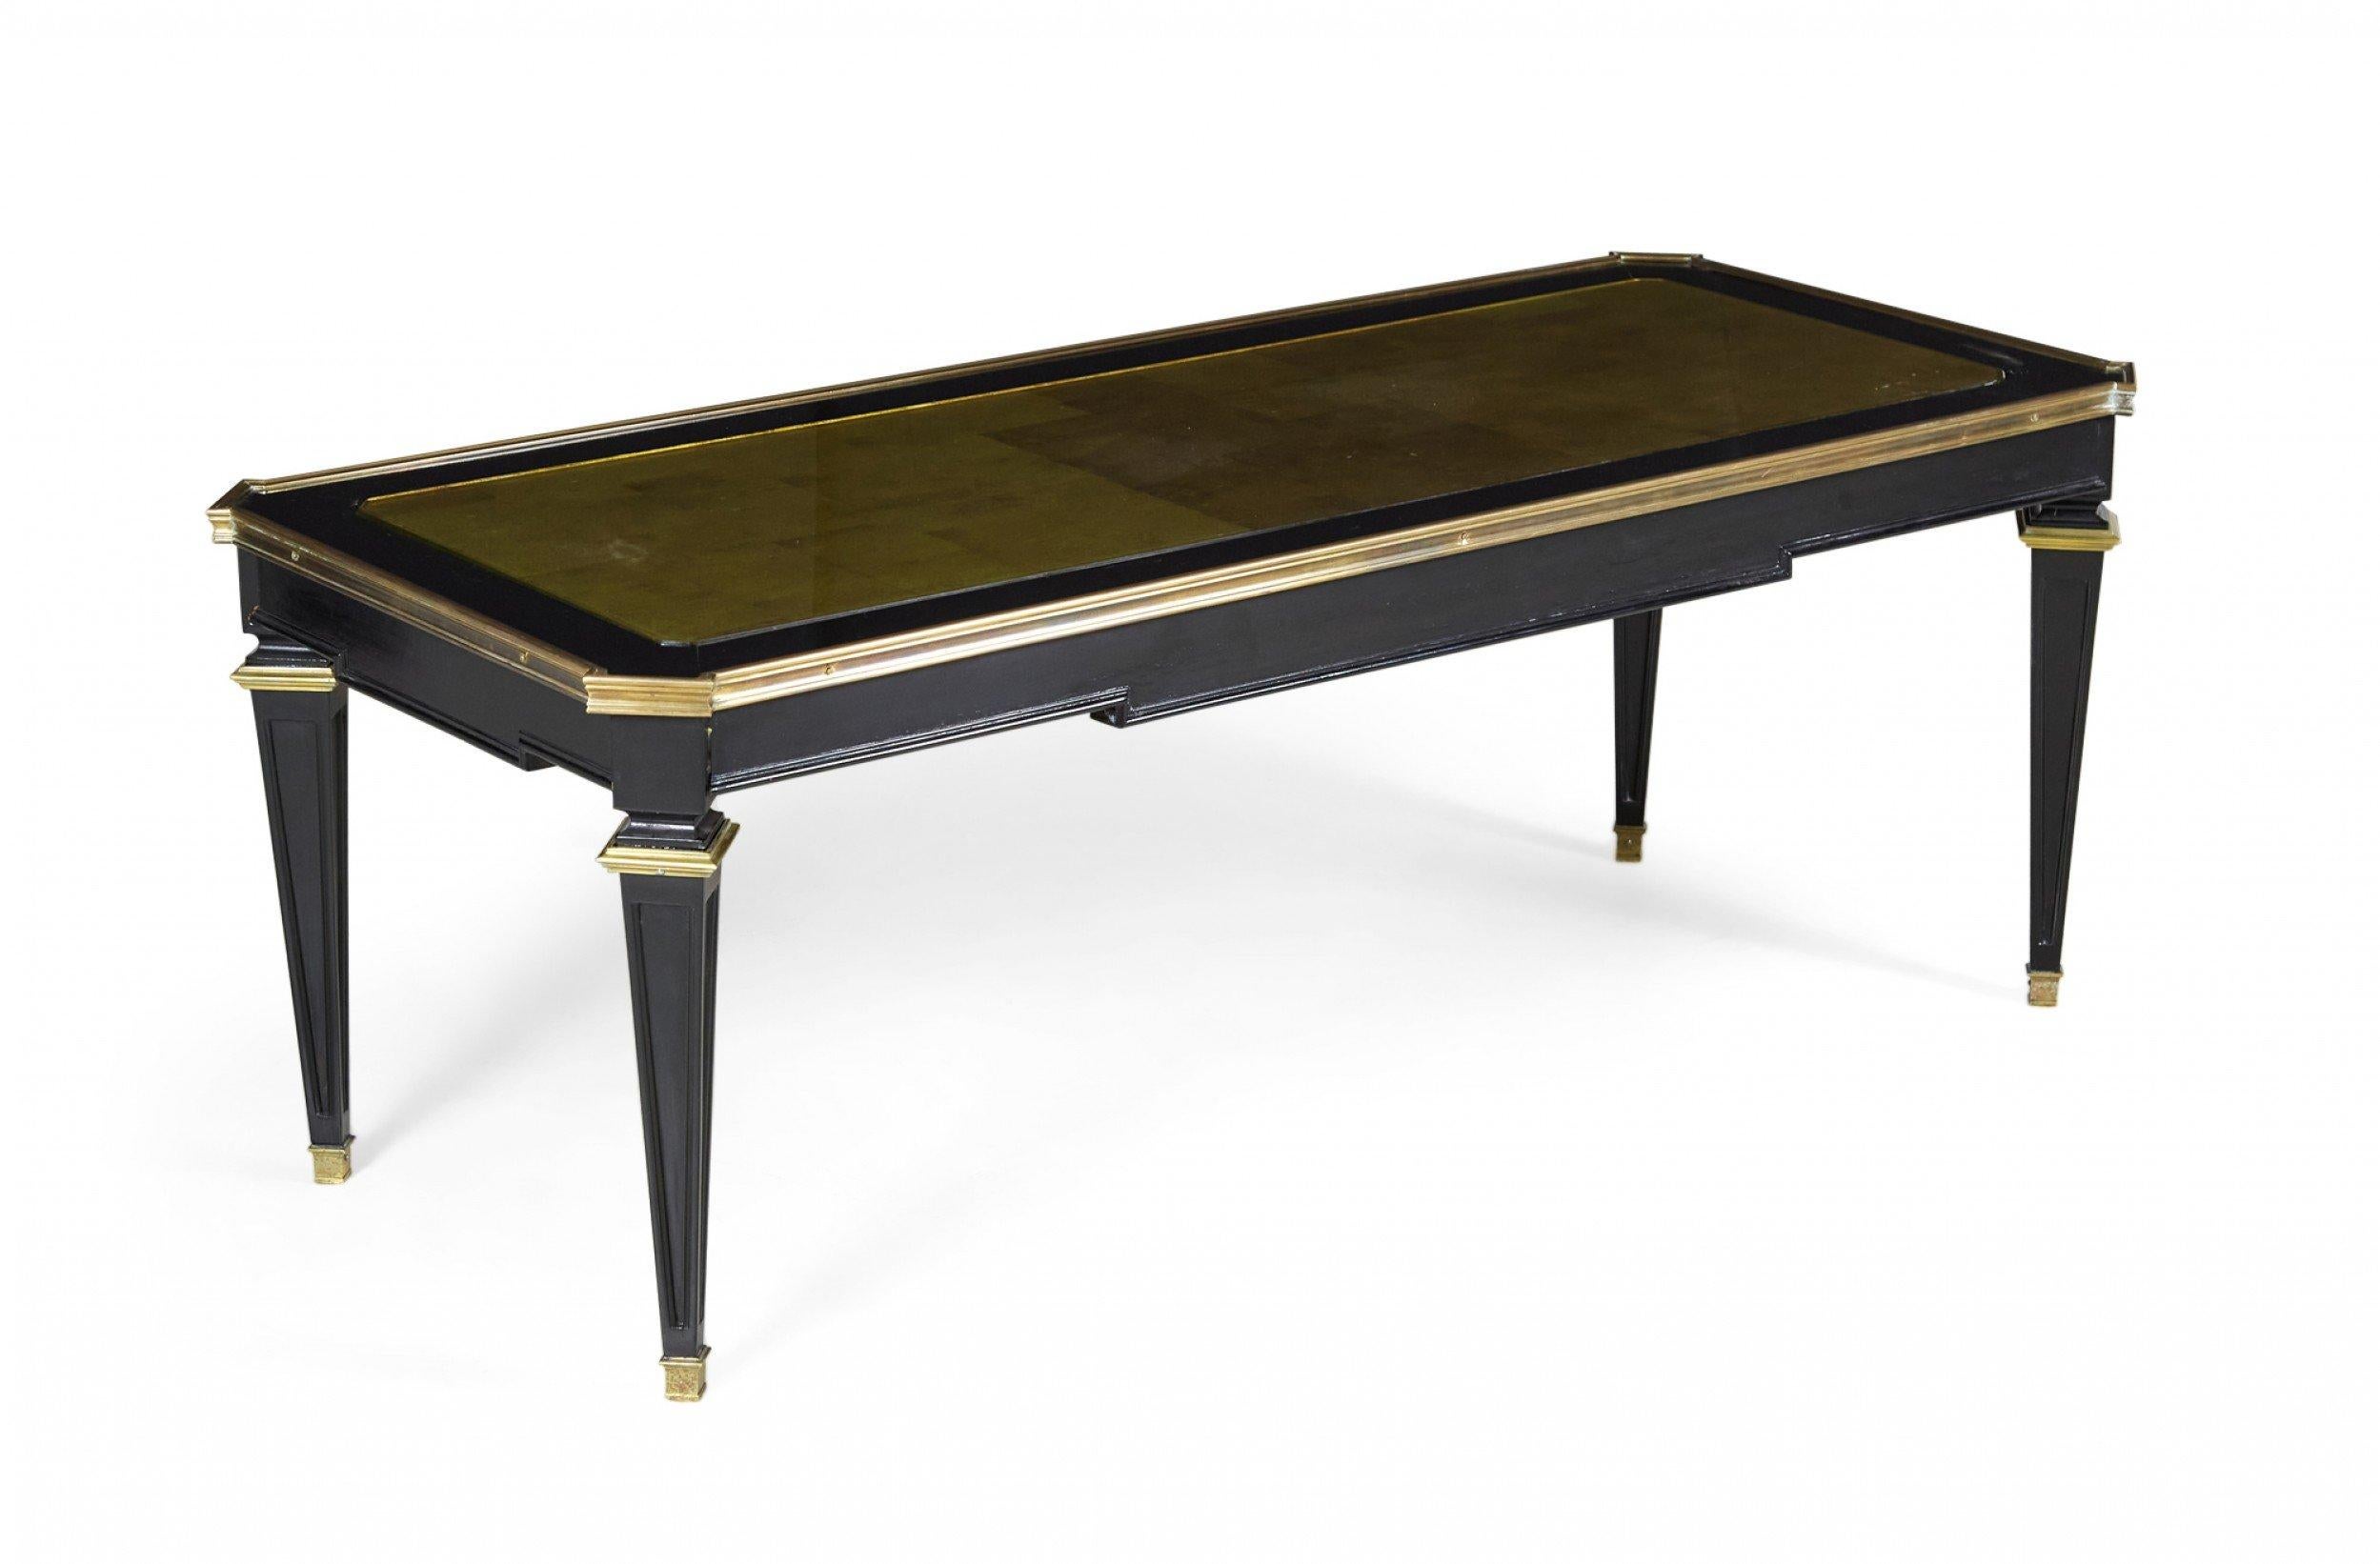 French Mid-Century (1940s) ebonized wooden coffee table with gilt painted trim, an inset gold glass top with geometric pattern, and four tapered square legs ending in brass sabots. (MAISON JANSEN).
 